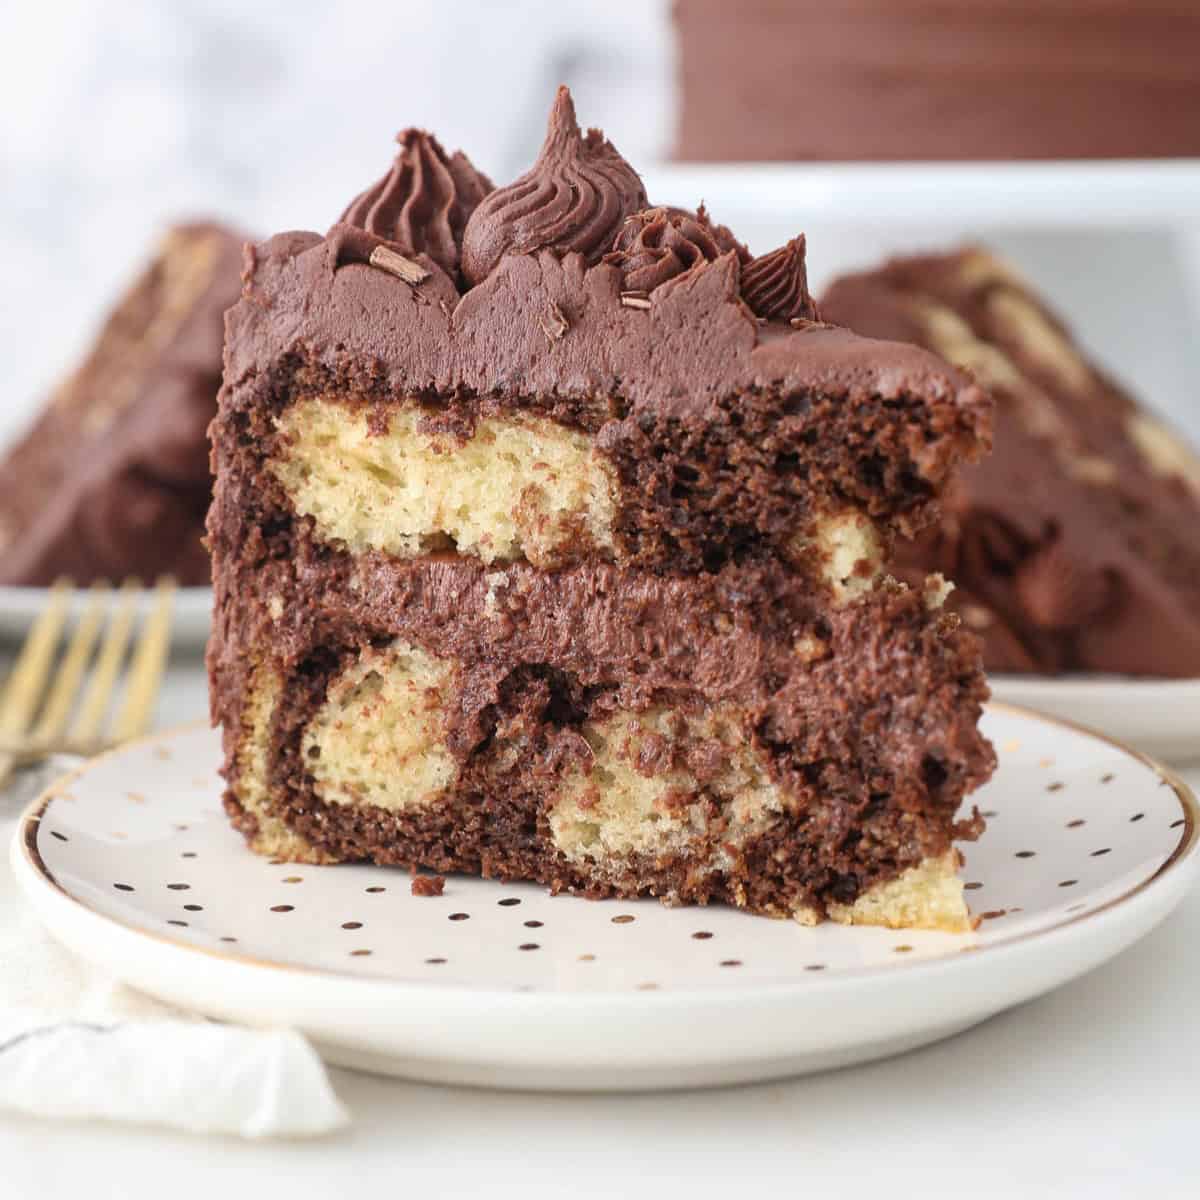 The Best Gluten Free Marble Cake Recipe - What the Fork